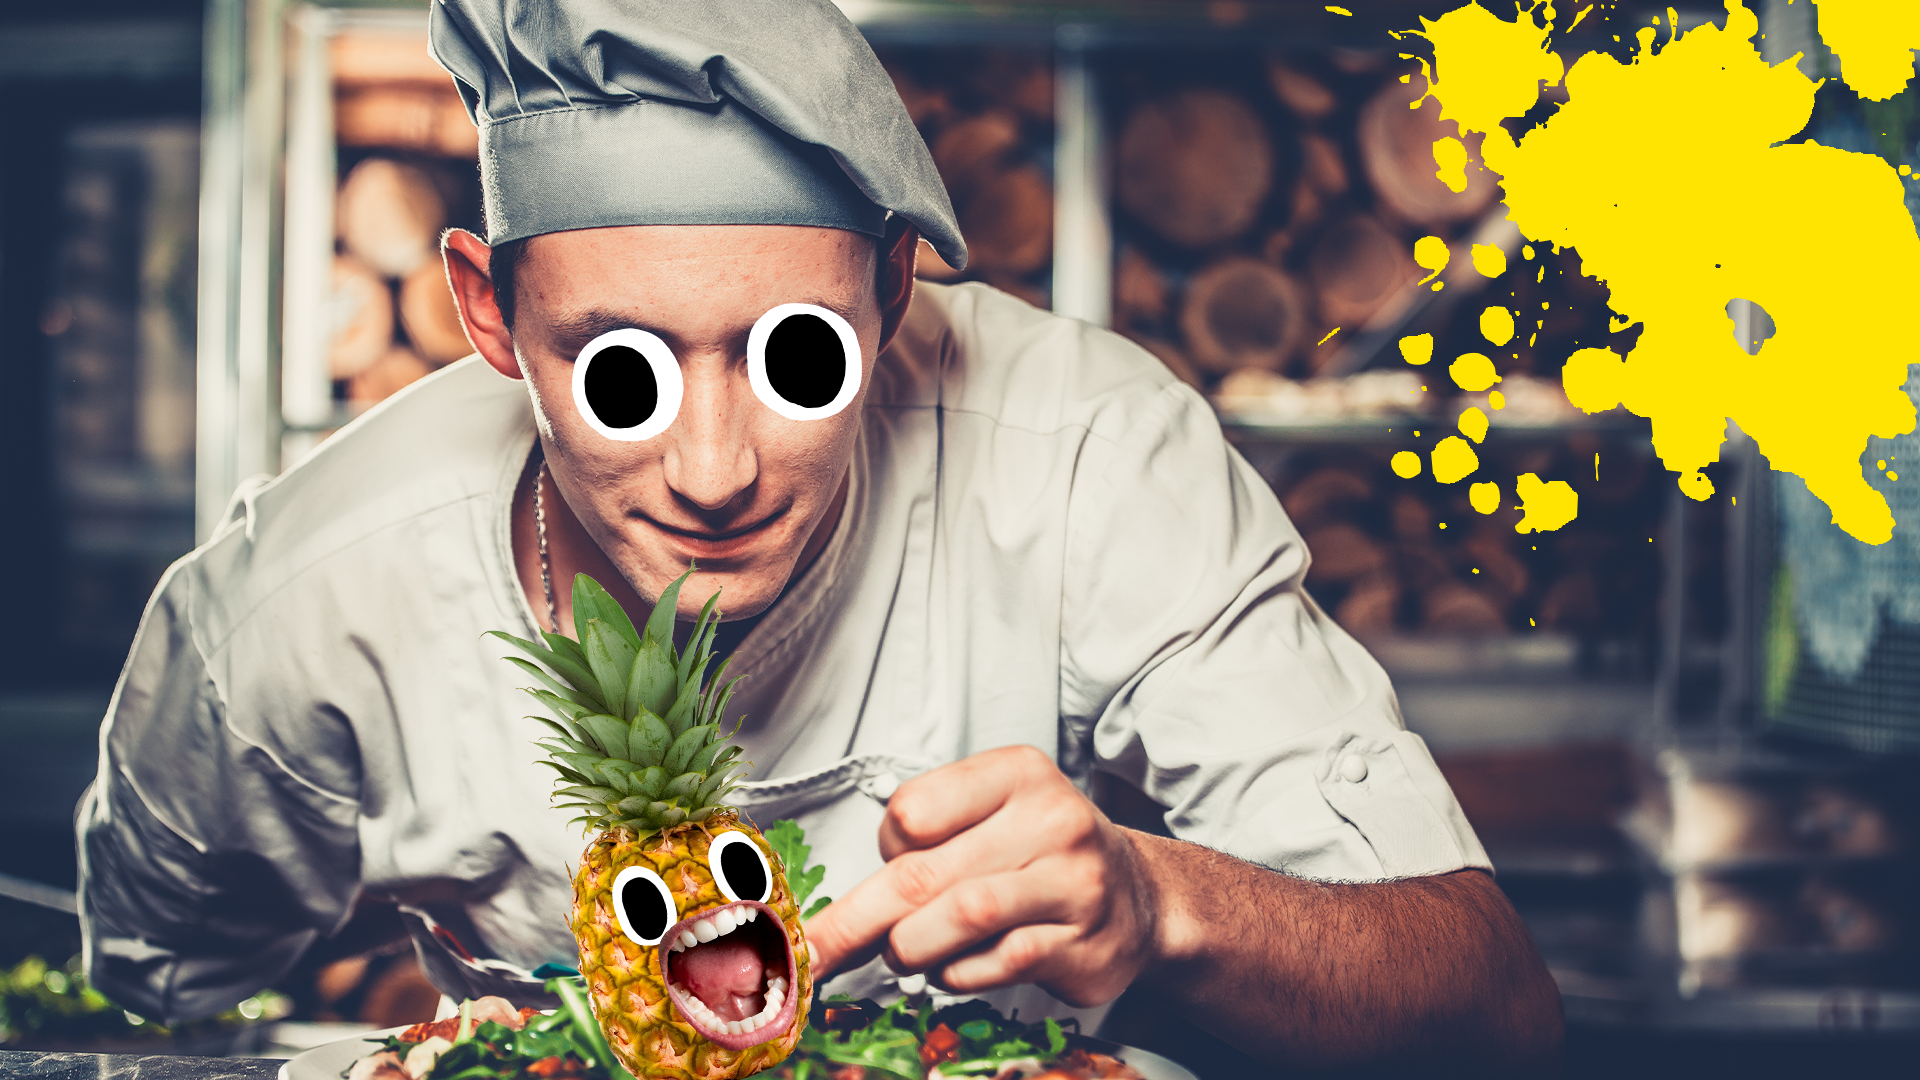 Chef cooking with screaming pineapple